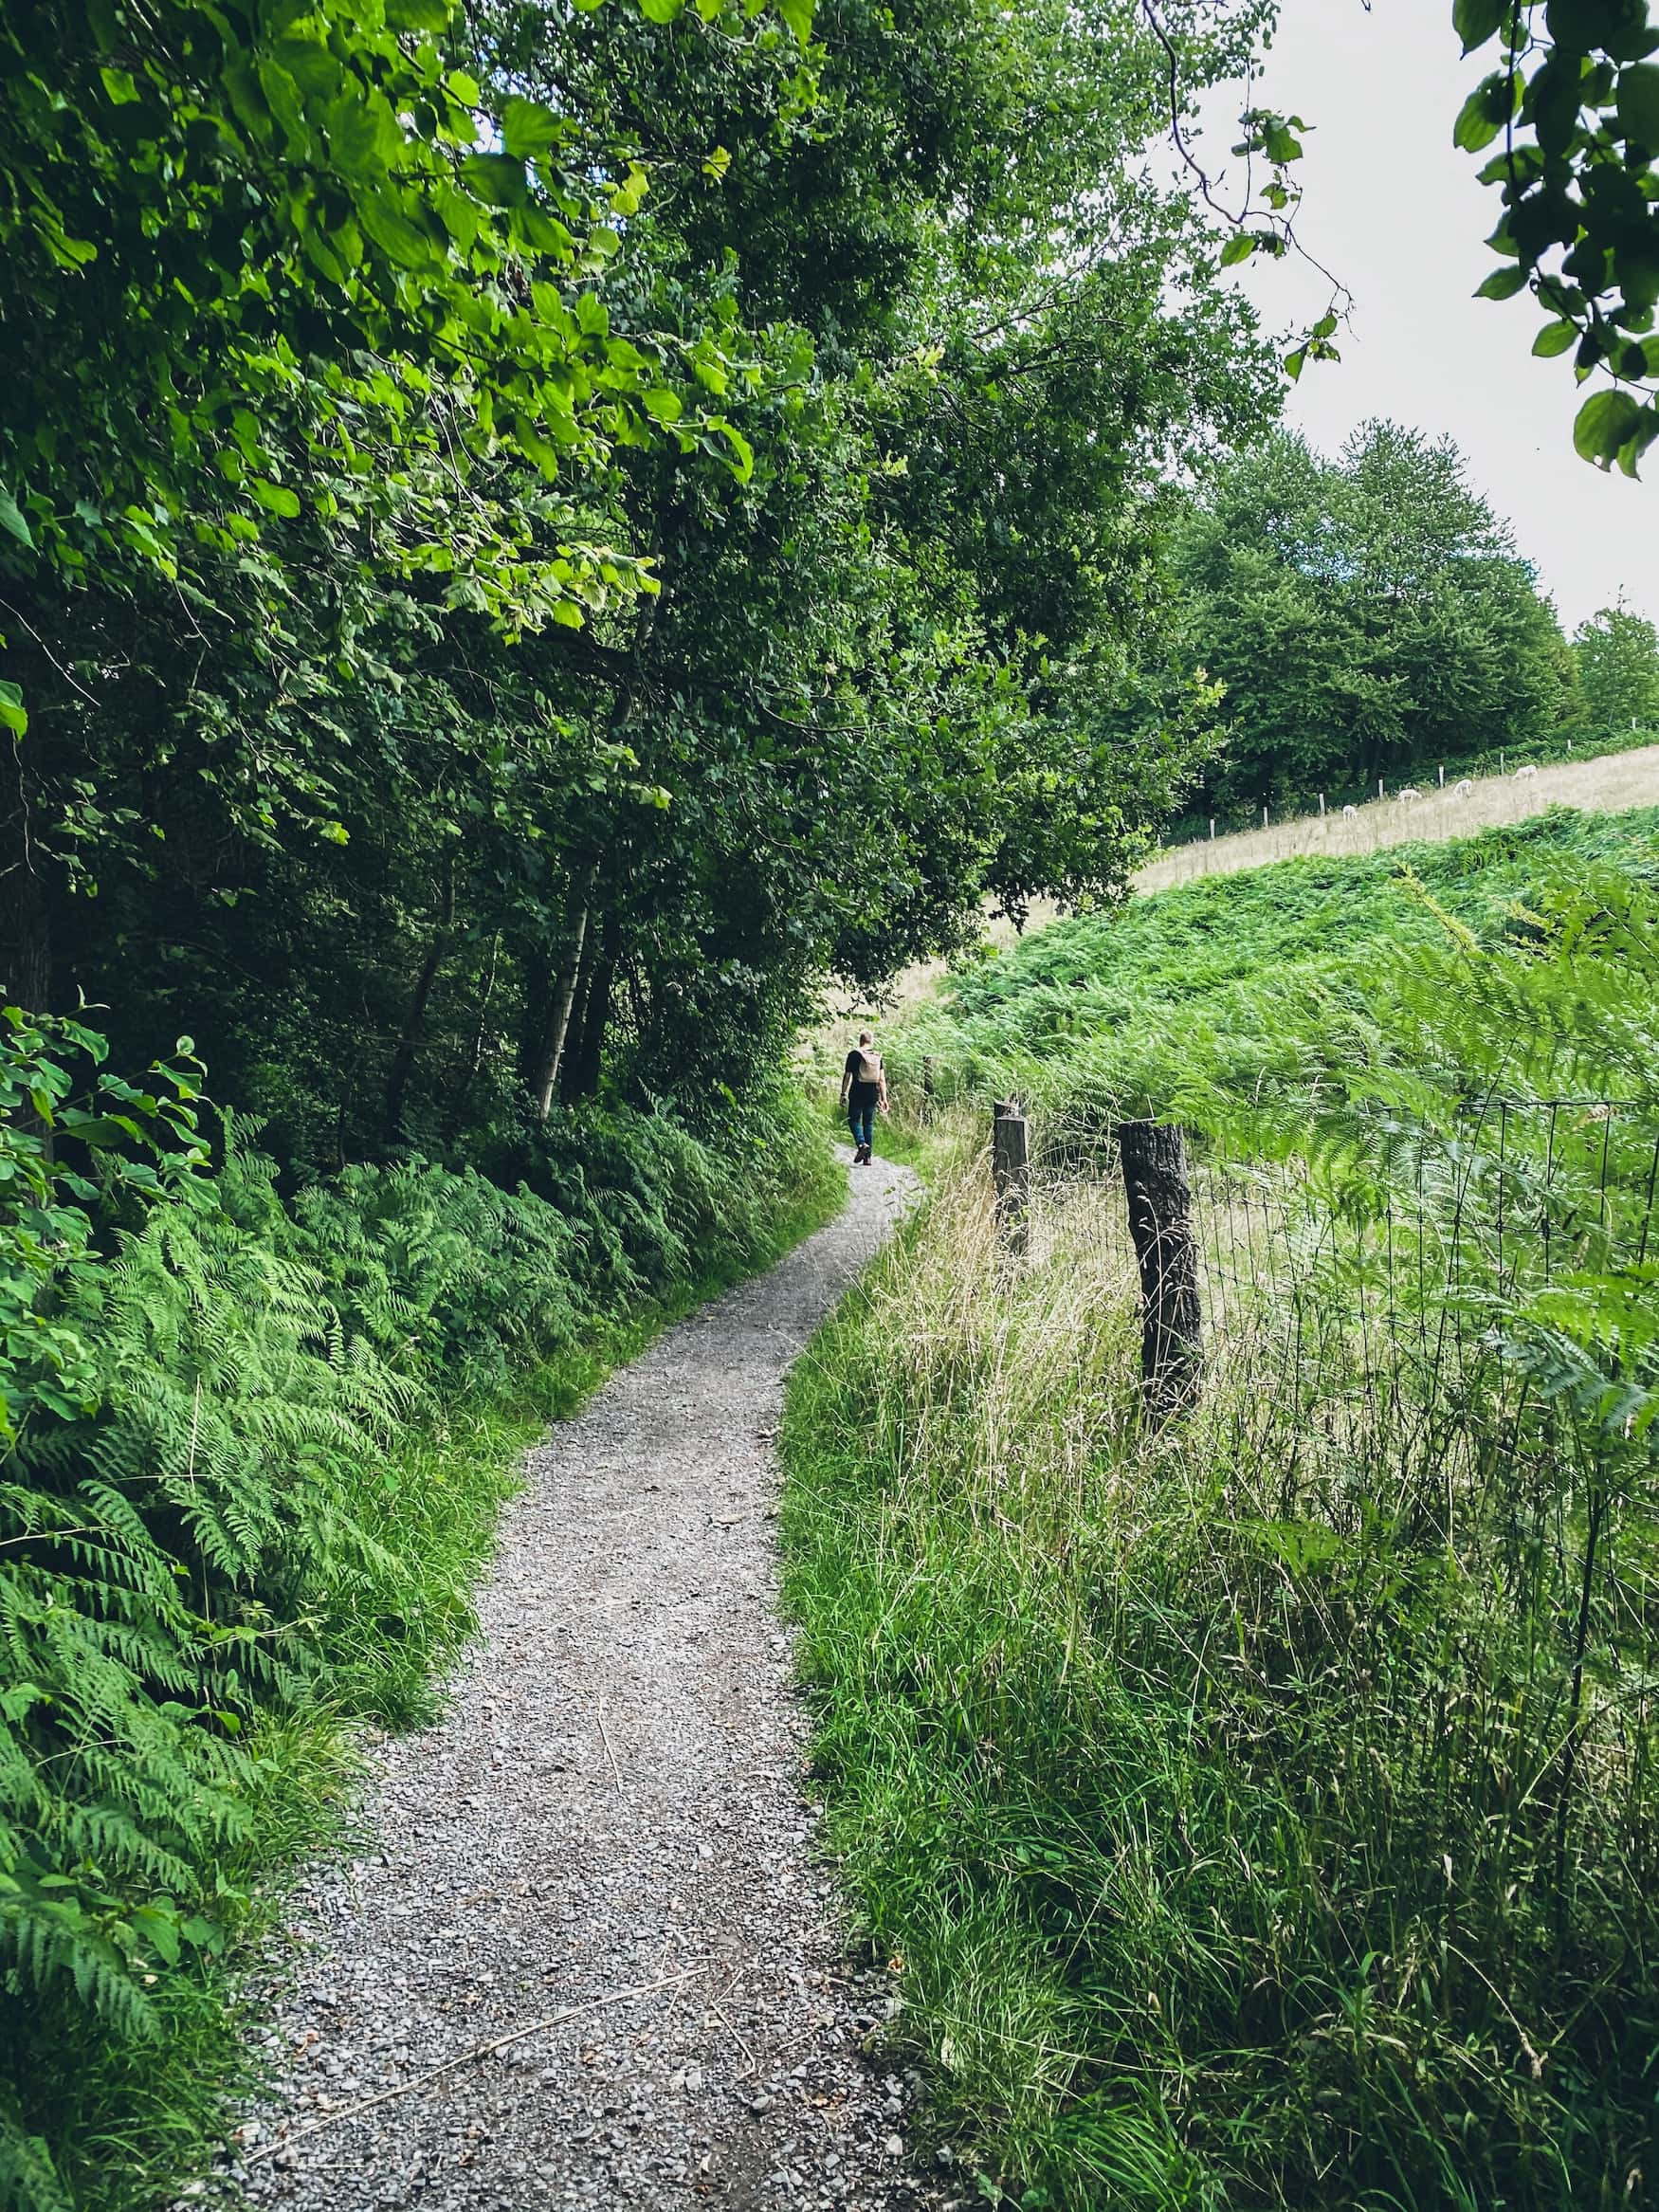 Man walking along a path in the Neandertal, one of the most beautiful green spaces in NRW